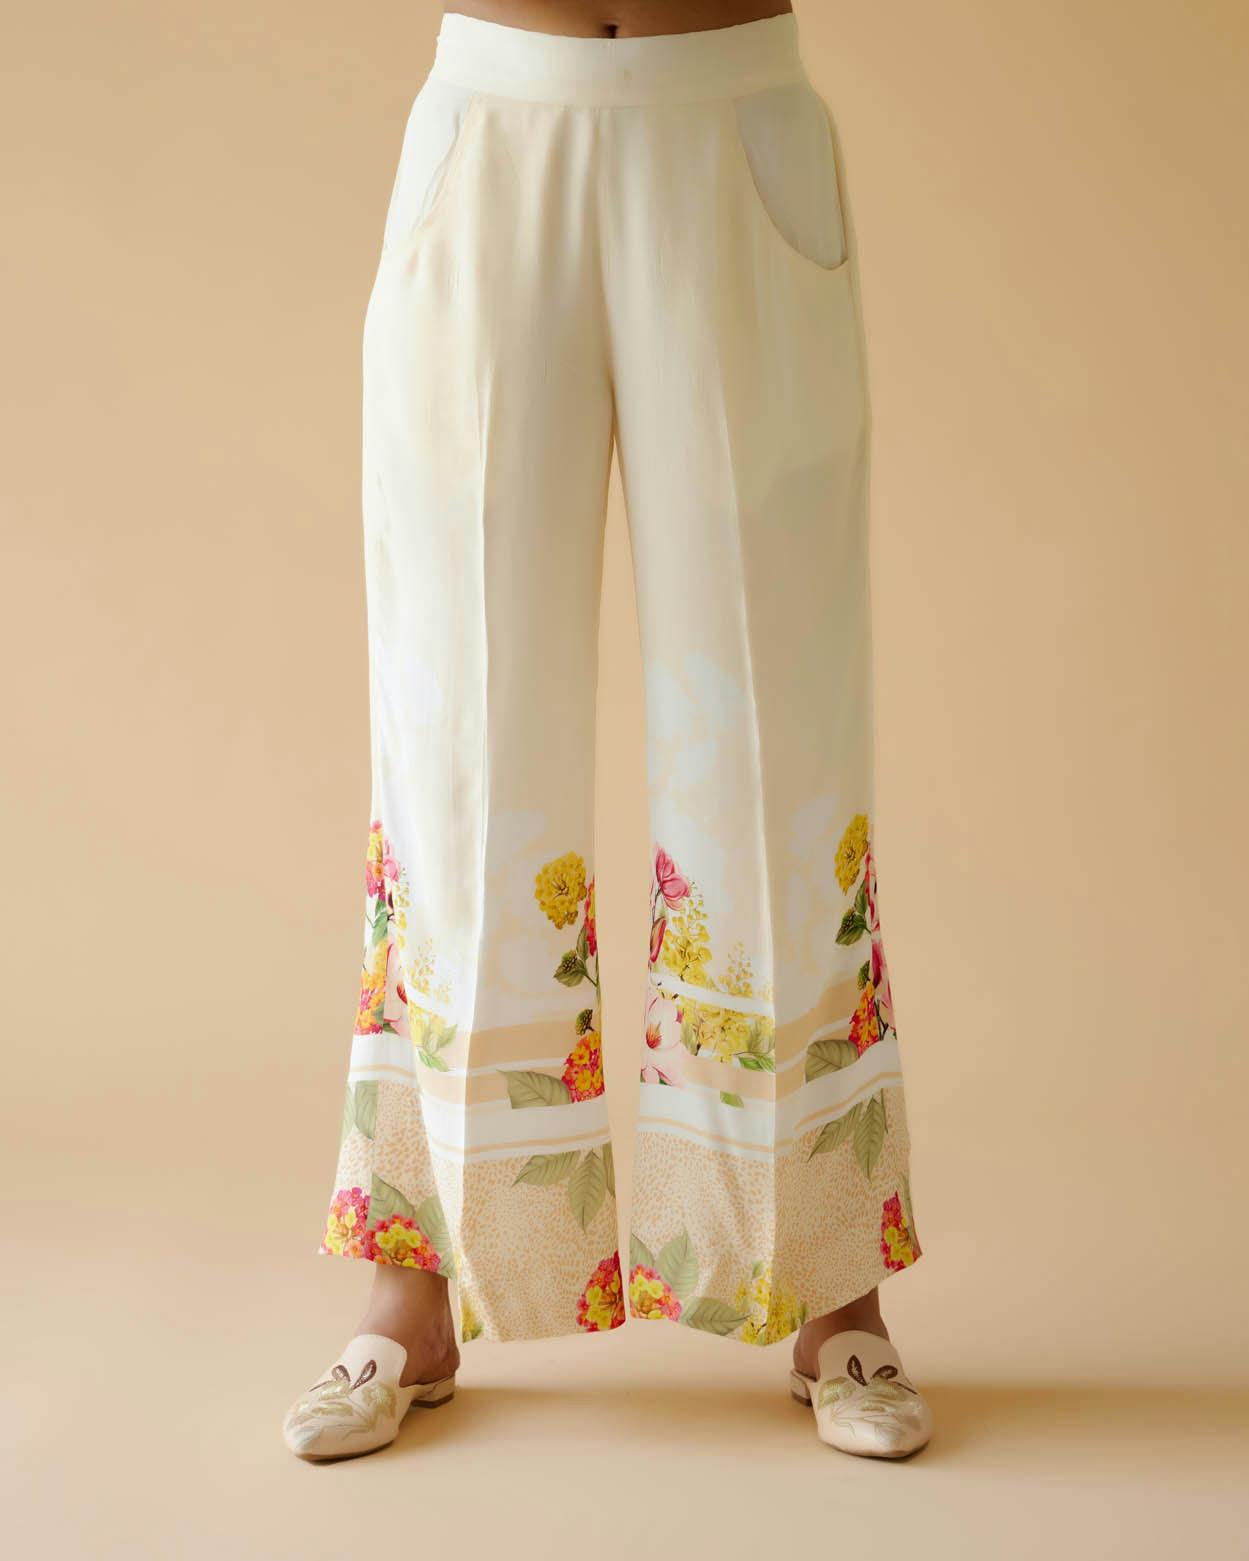 Gazelle Trousers, a product by Moh India